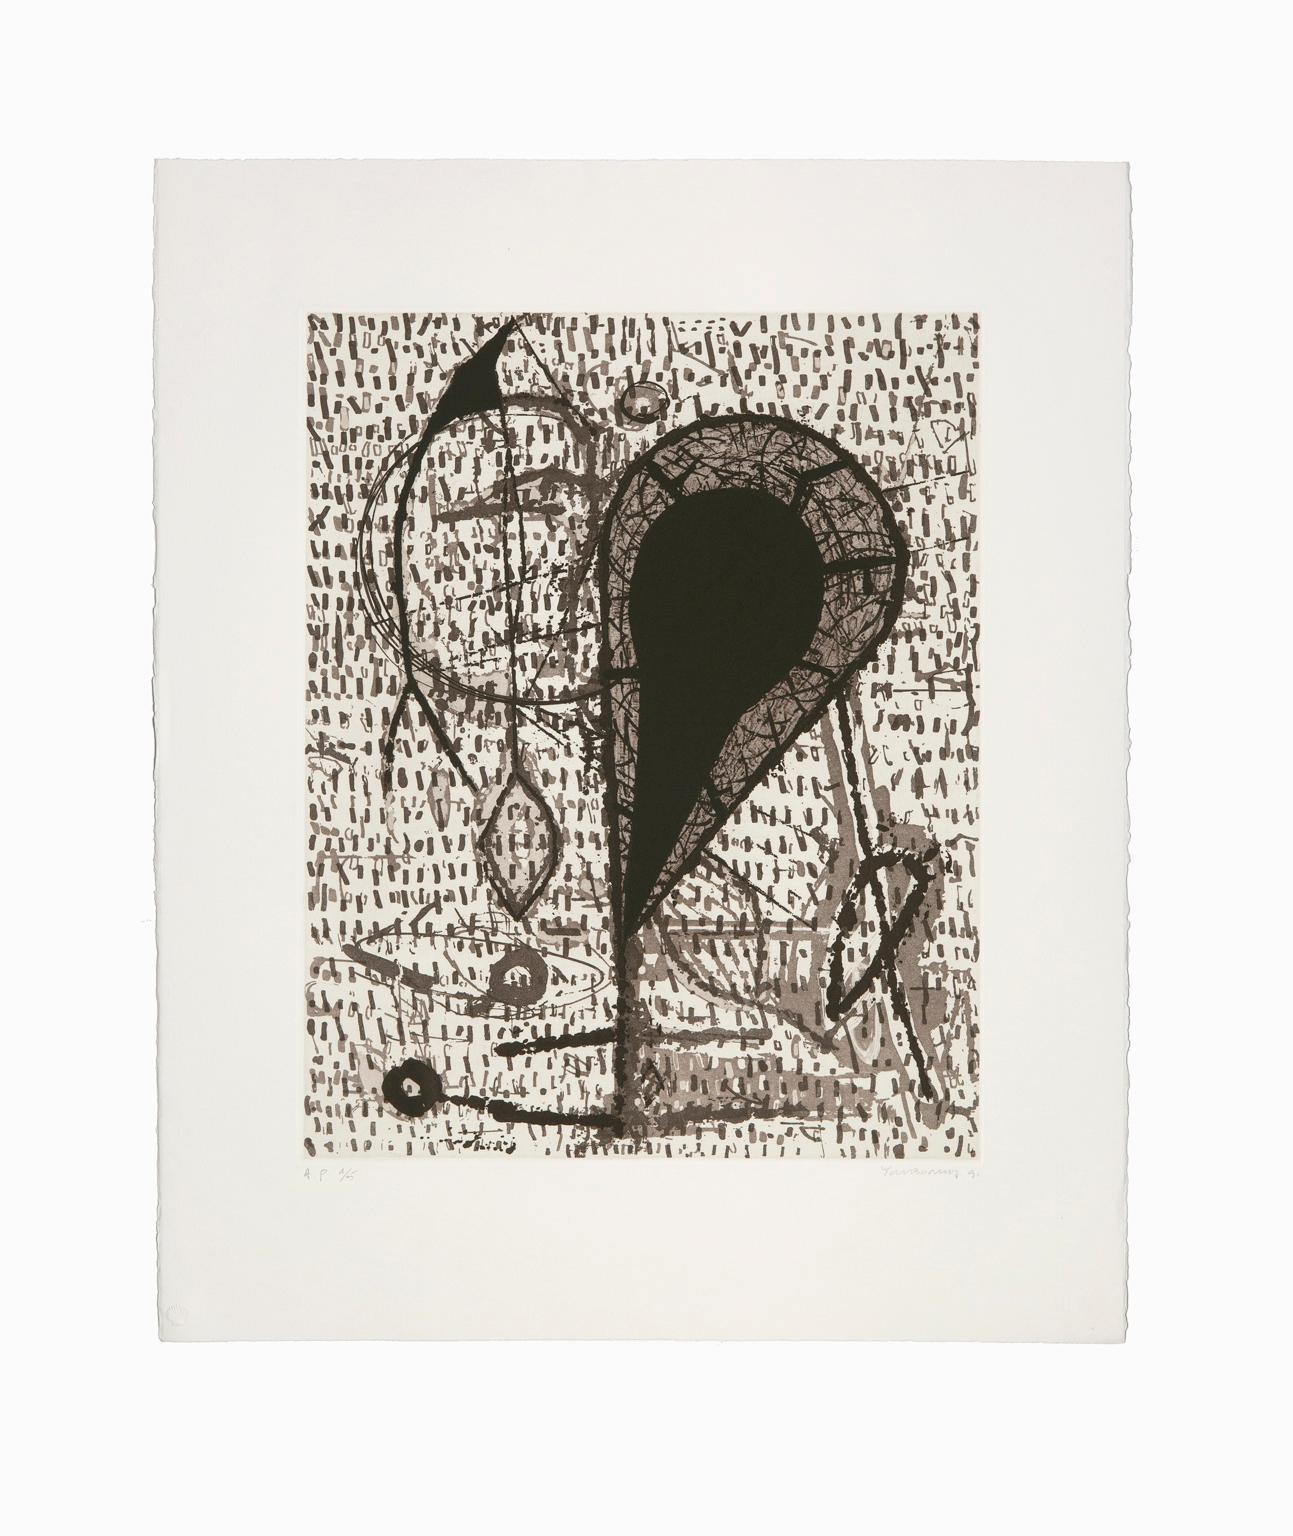 Bert Yarborough Abstract Print - "Untitled I", Abstract Etching and Aquatint Lithograph, Signed and Numbered